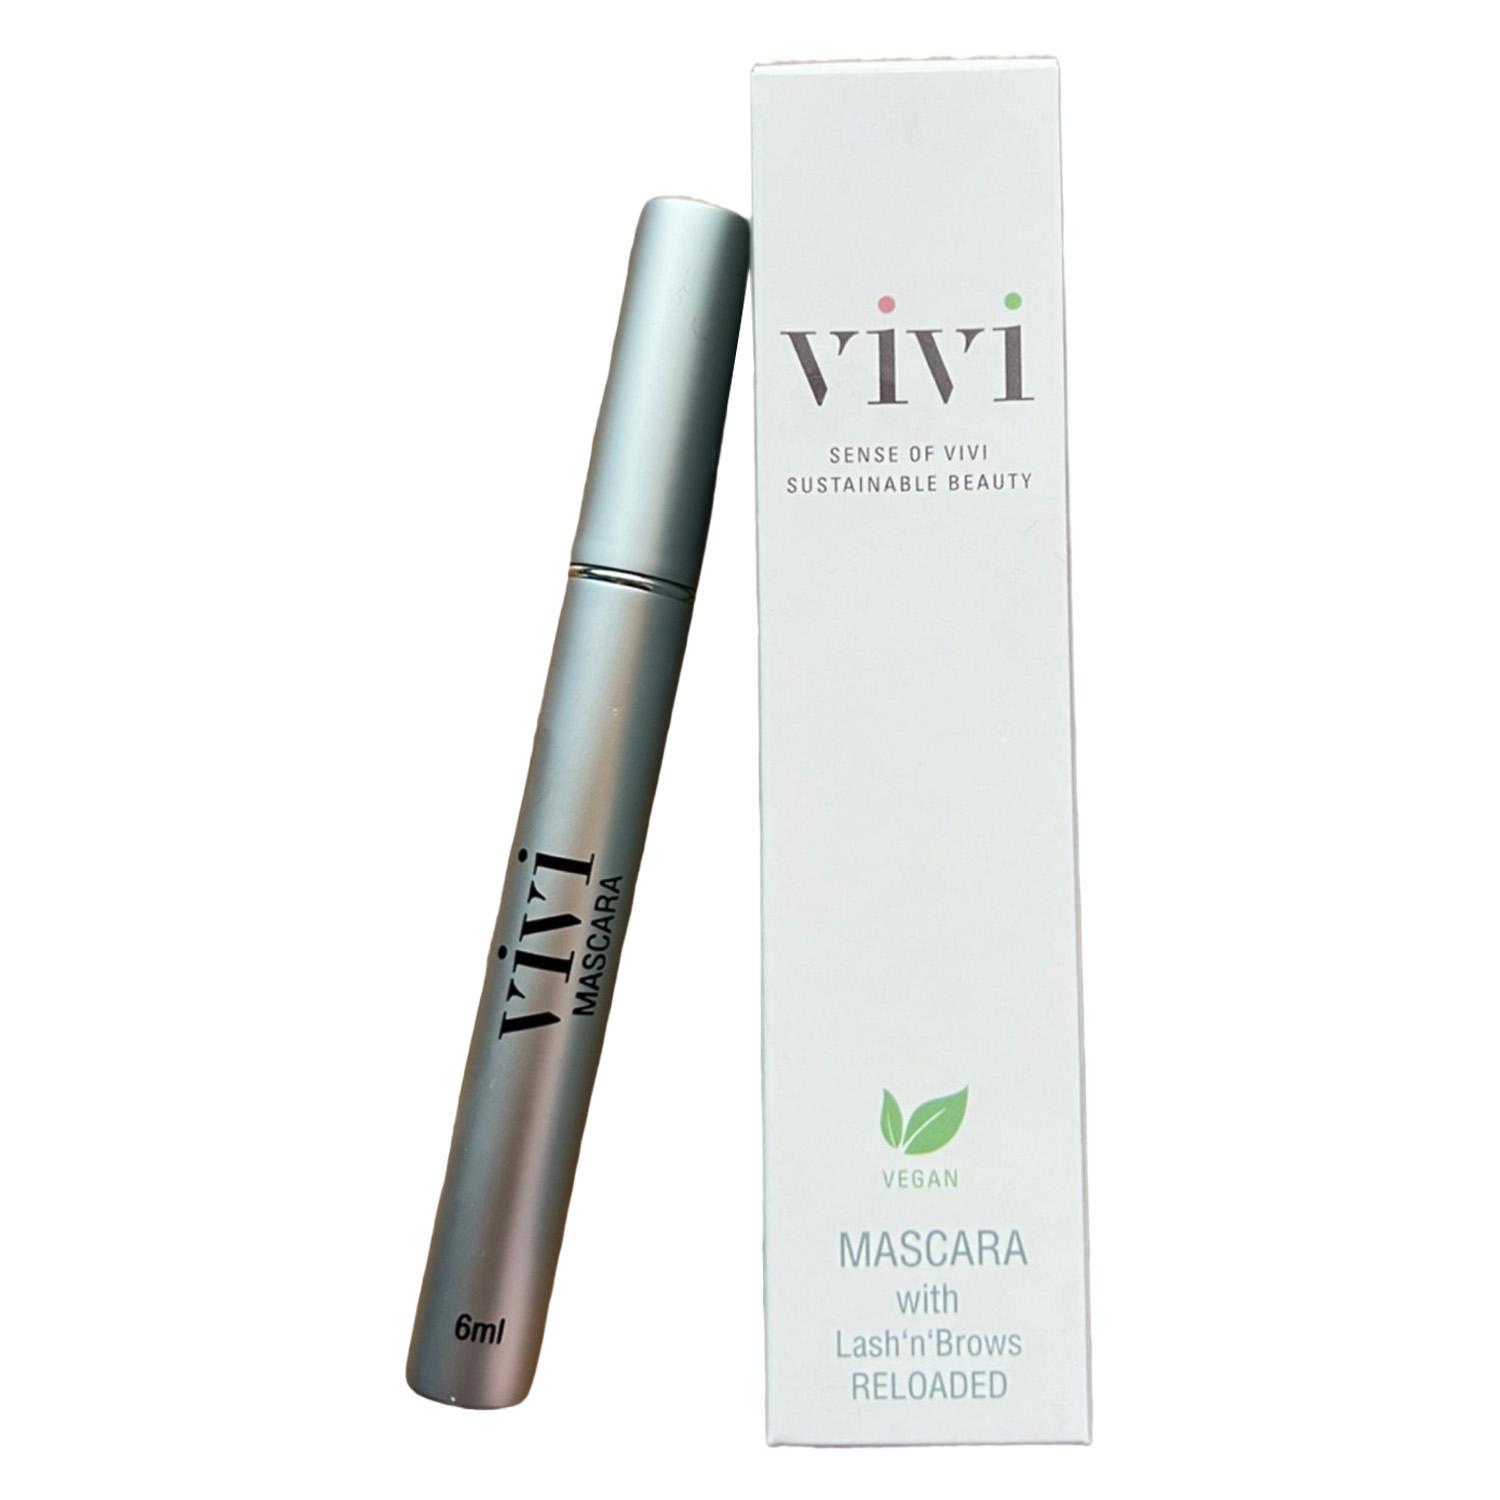 Vivi Beauty - Mascara with Lash’n’Brows Reloaded